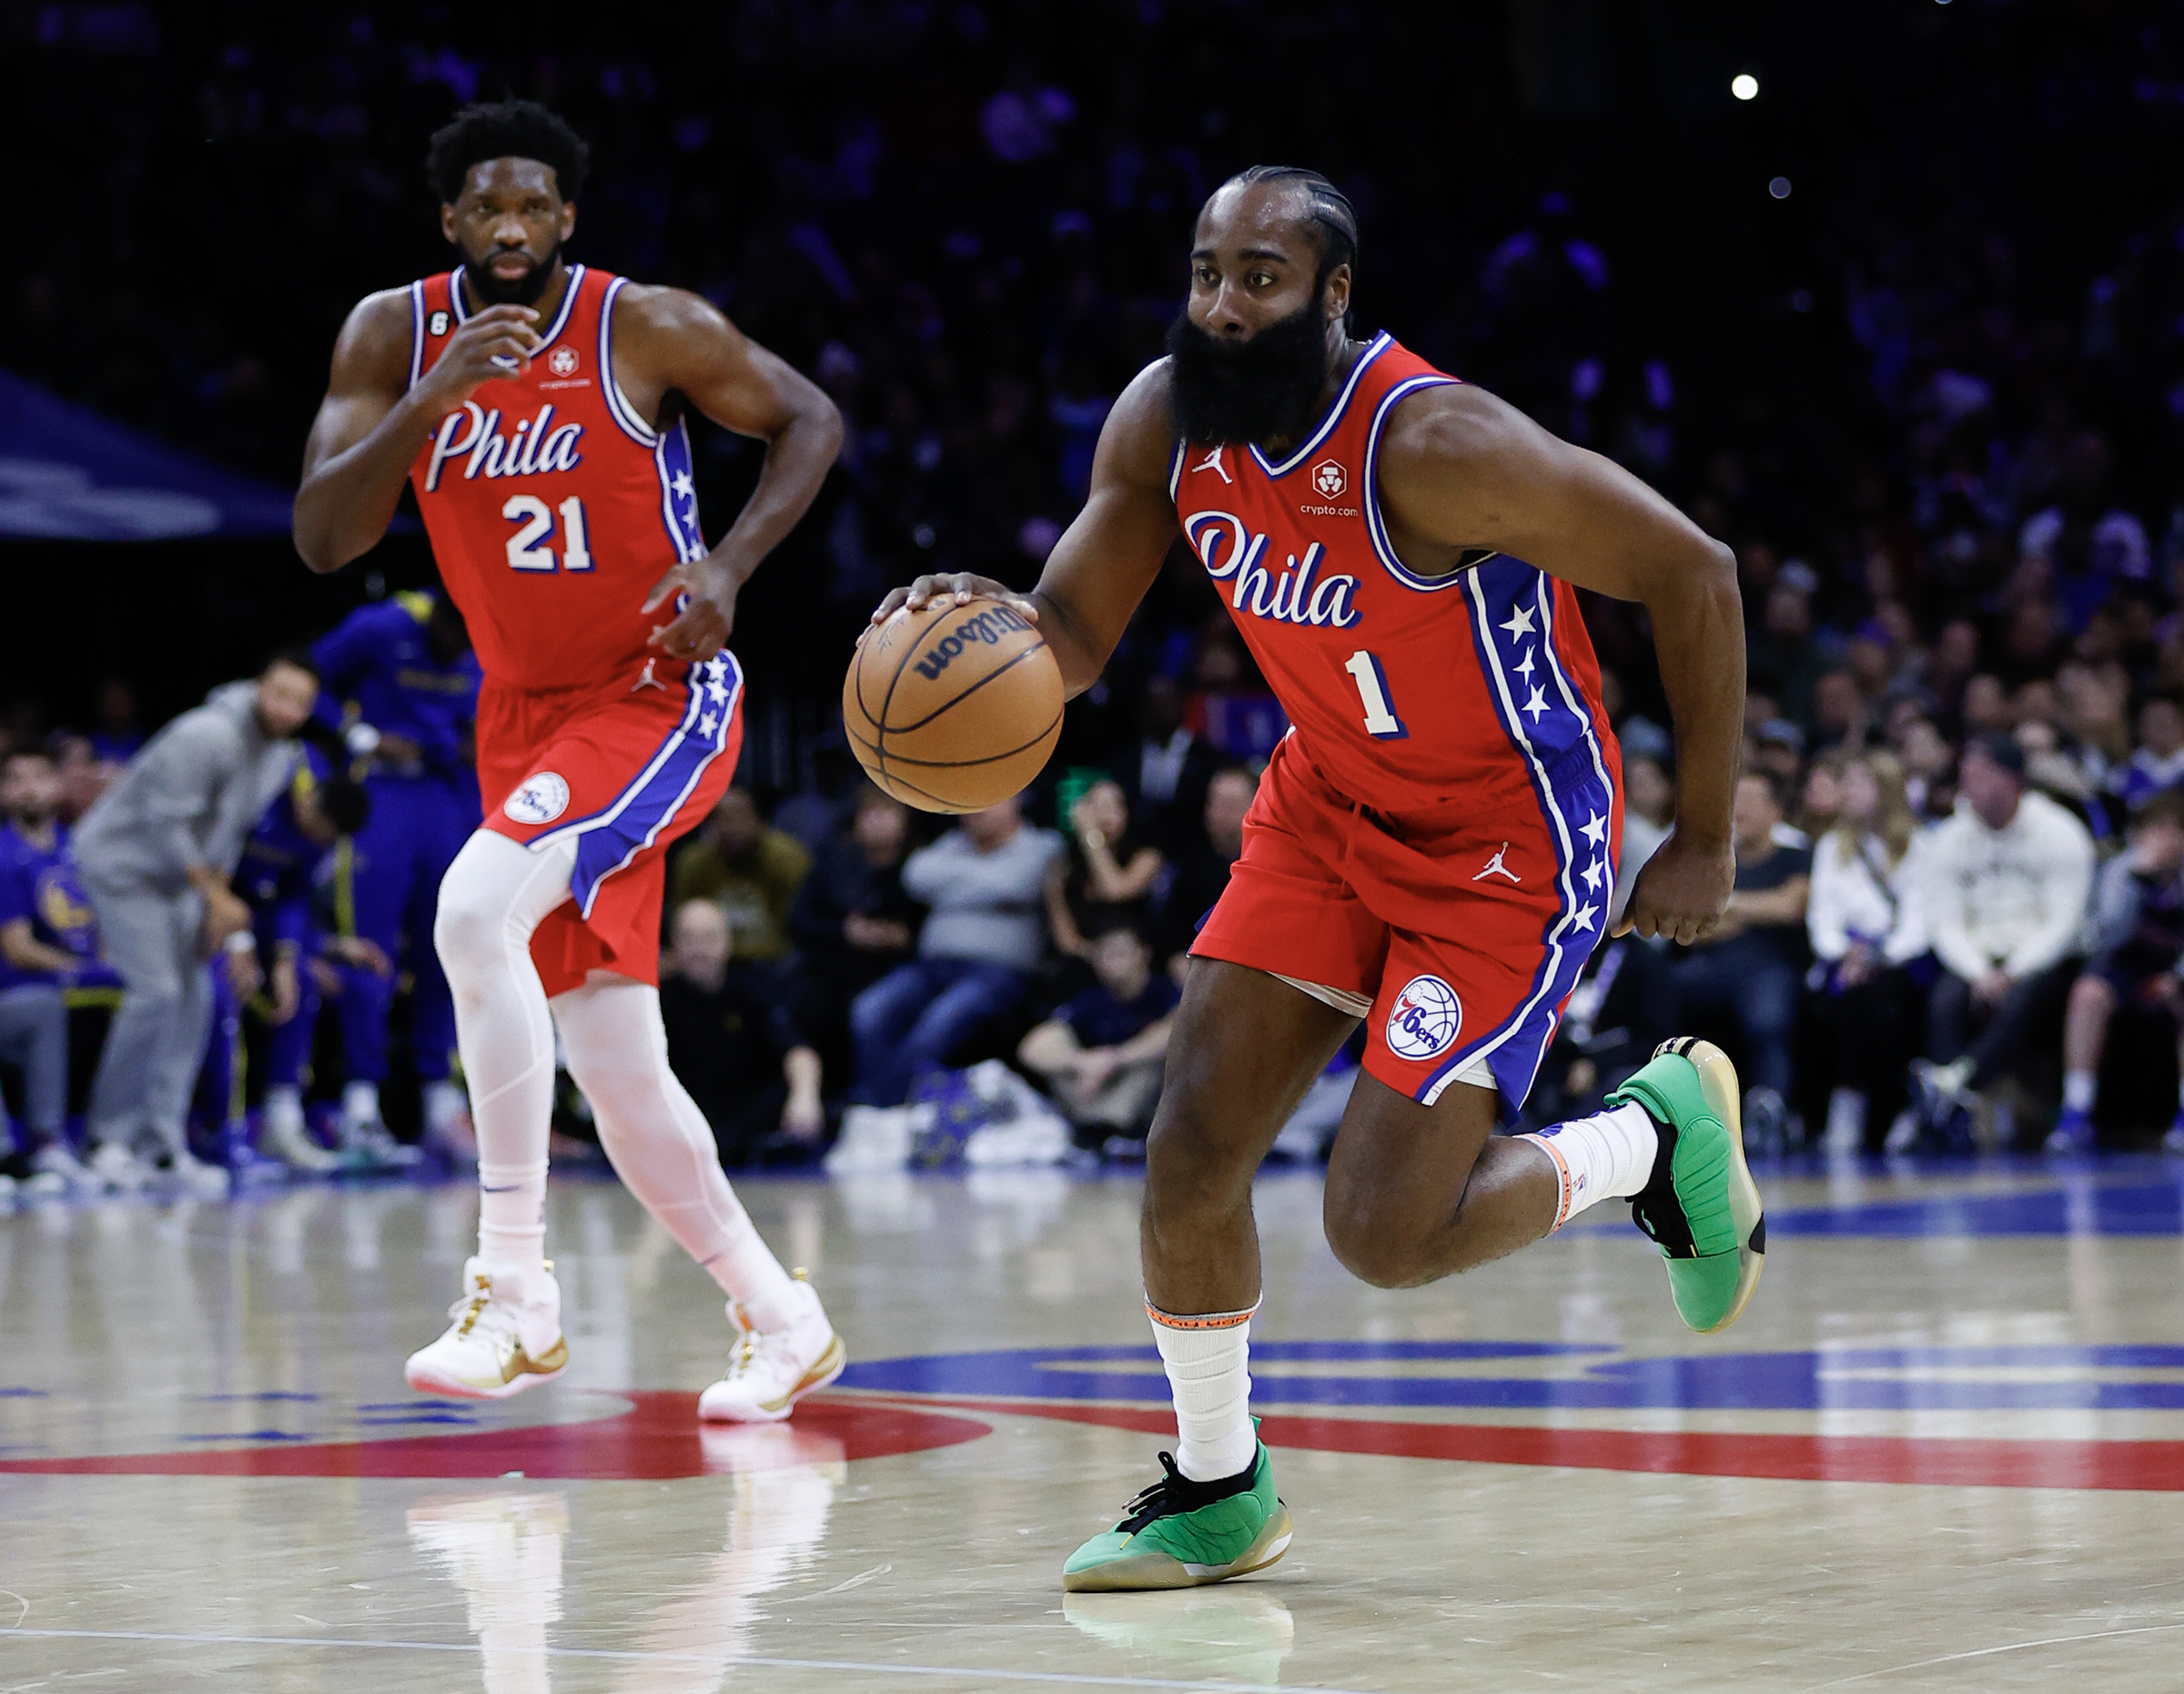 Mitchell & Ness expands ownership group to include James Harden, Joel Embiid  and more